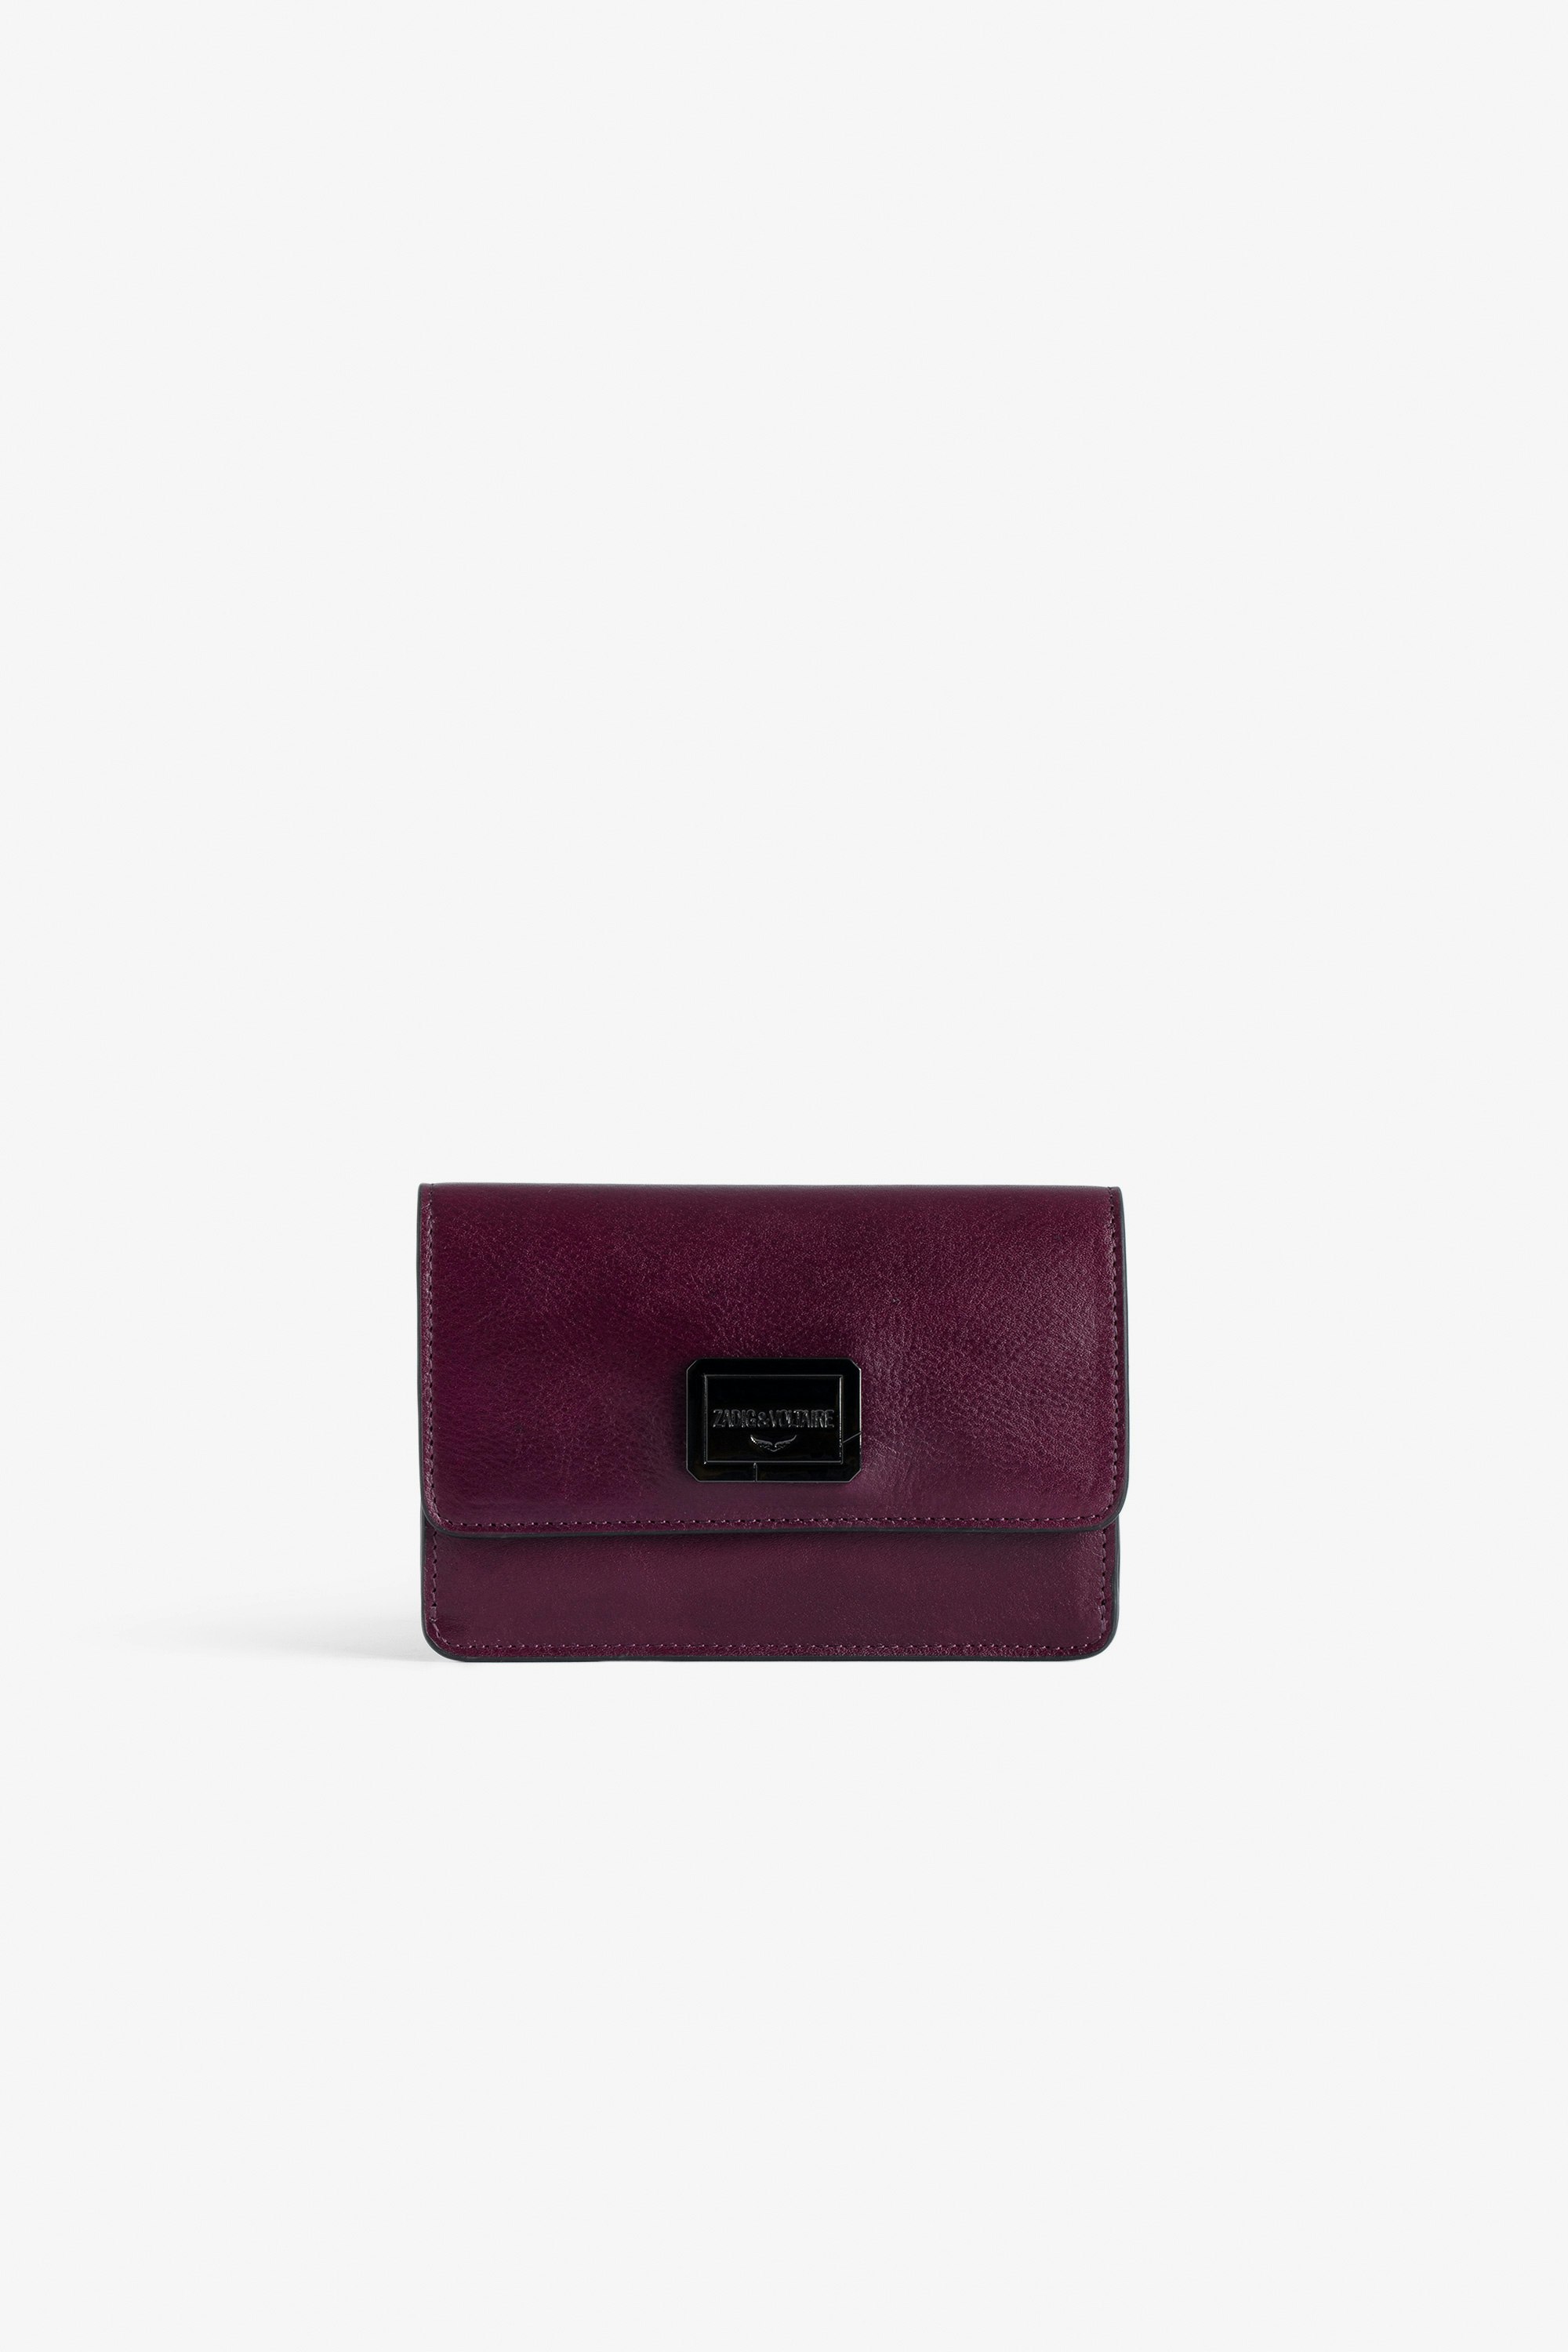 Le Cecilia 財布 - Women’s burgundy leather wallet with flap